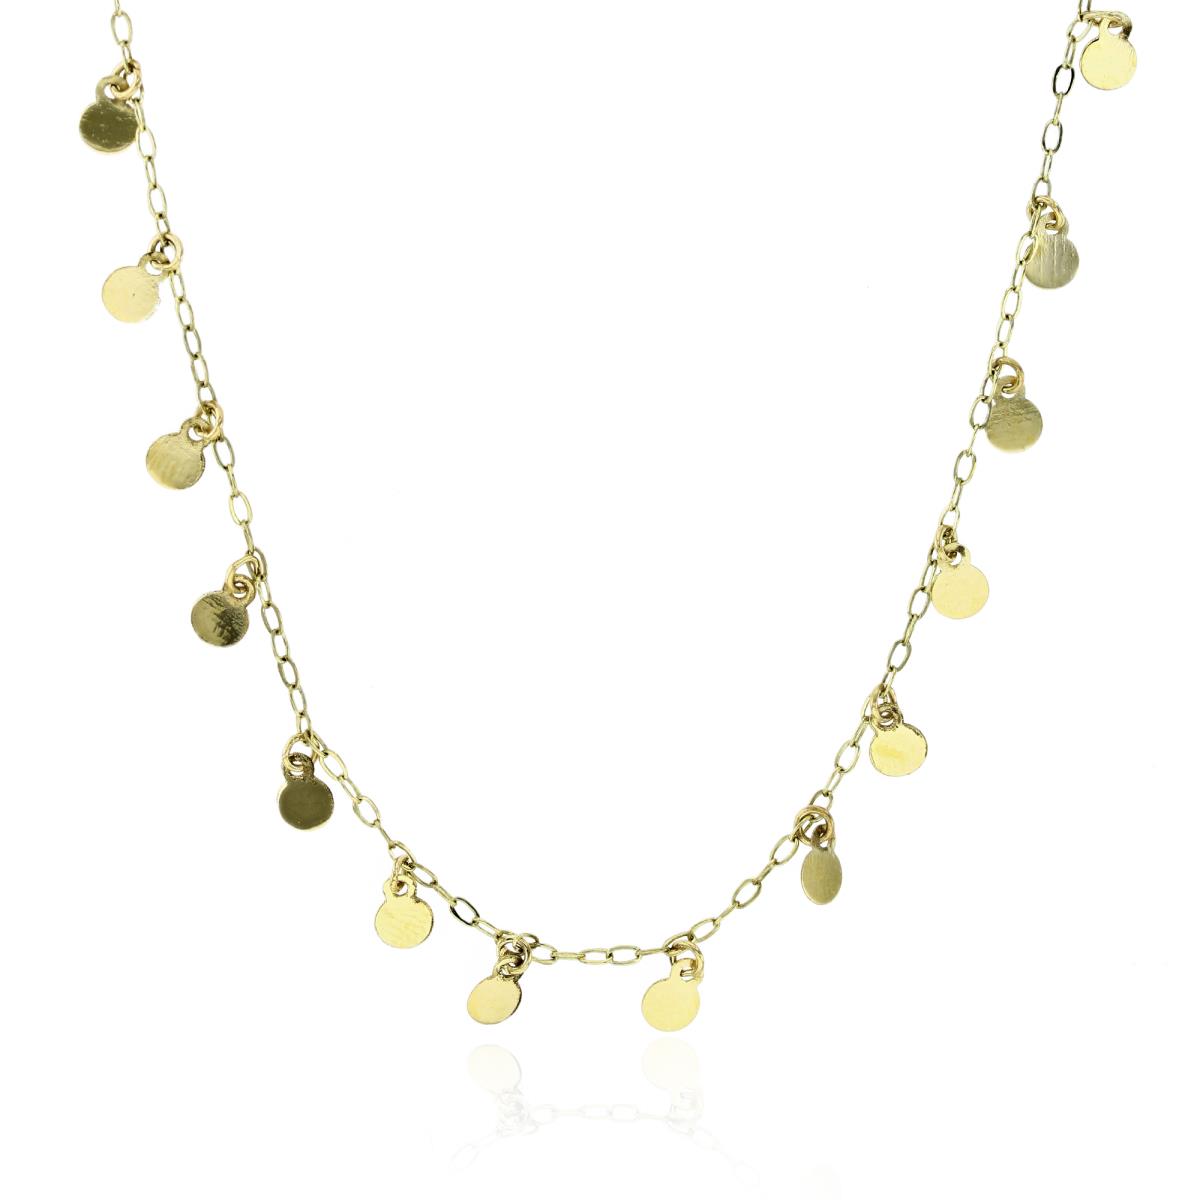 10K Yellow Gold 3mm Coins Dangling 17" Necklace